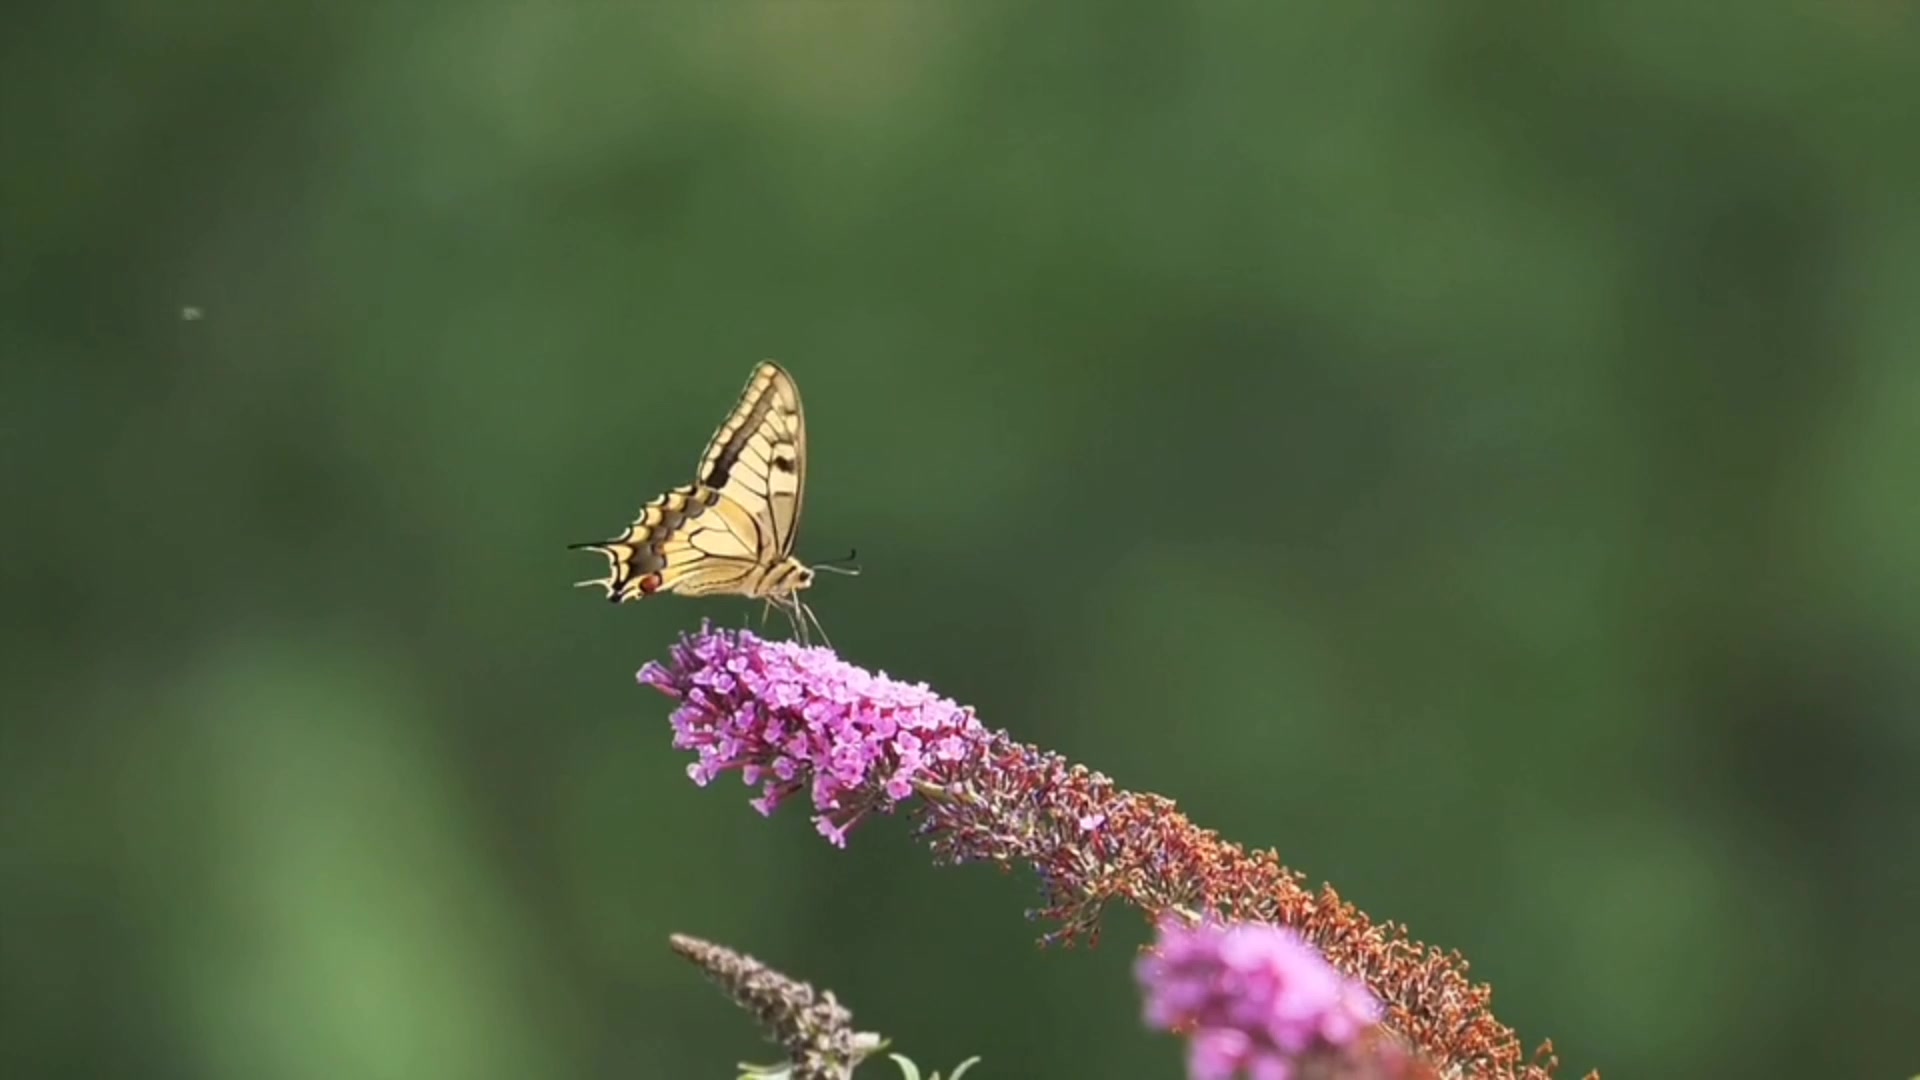 Butterfly on a Flower by Md Asfi Aiyan